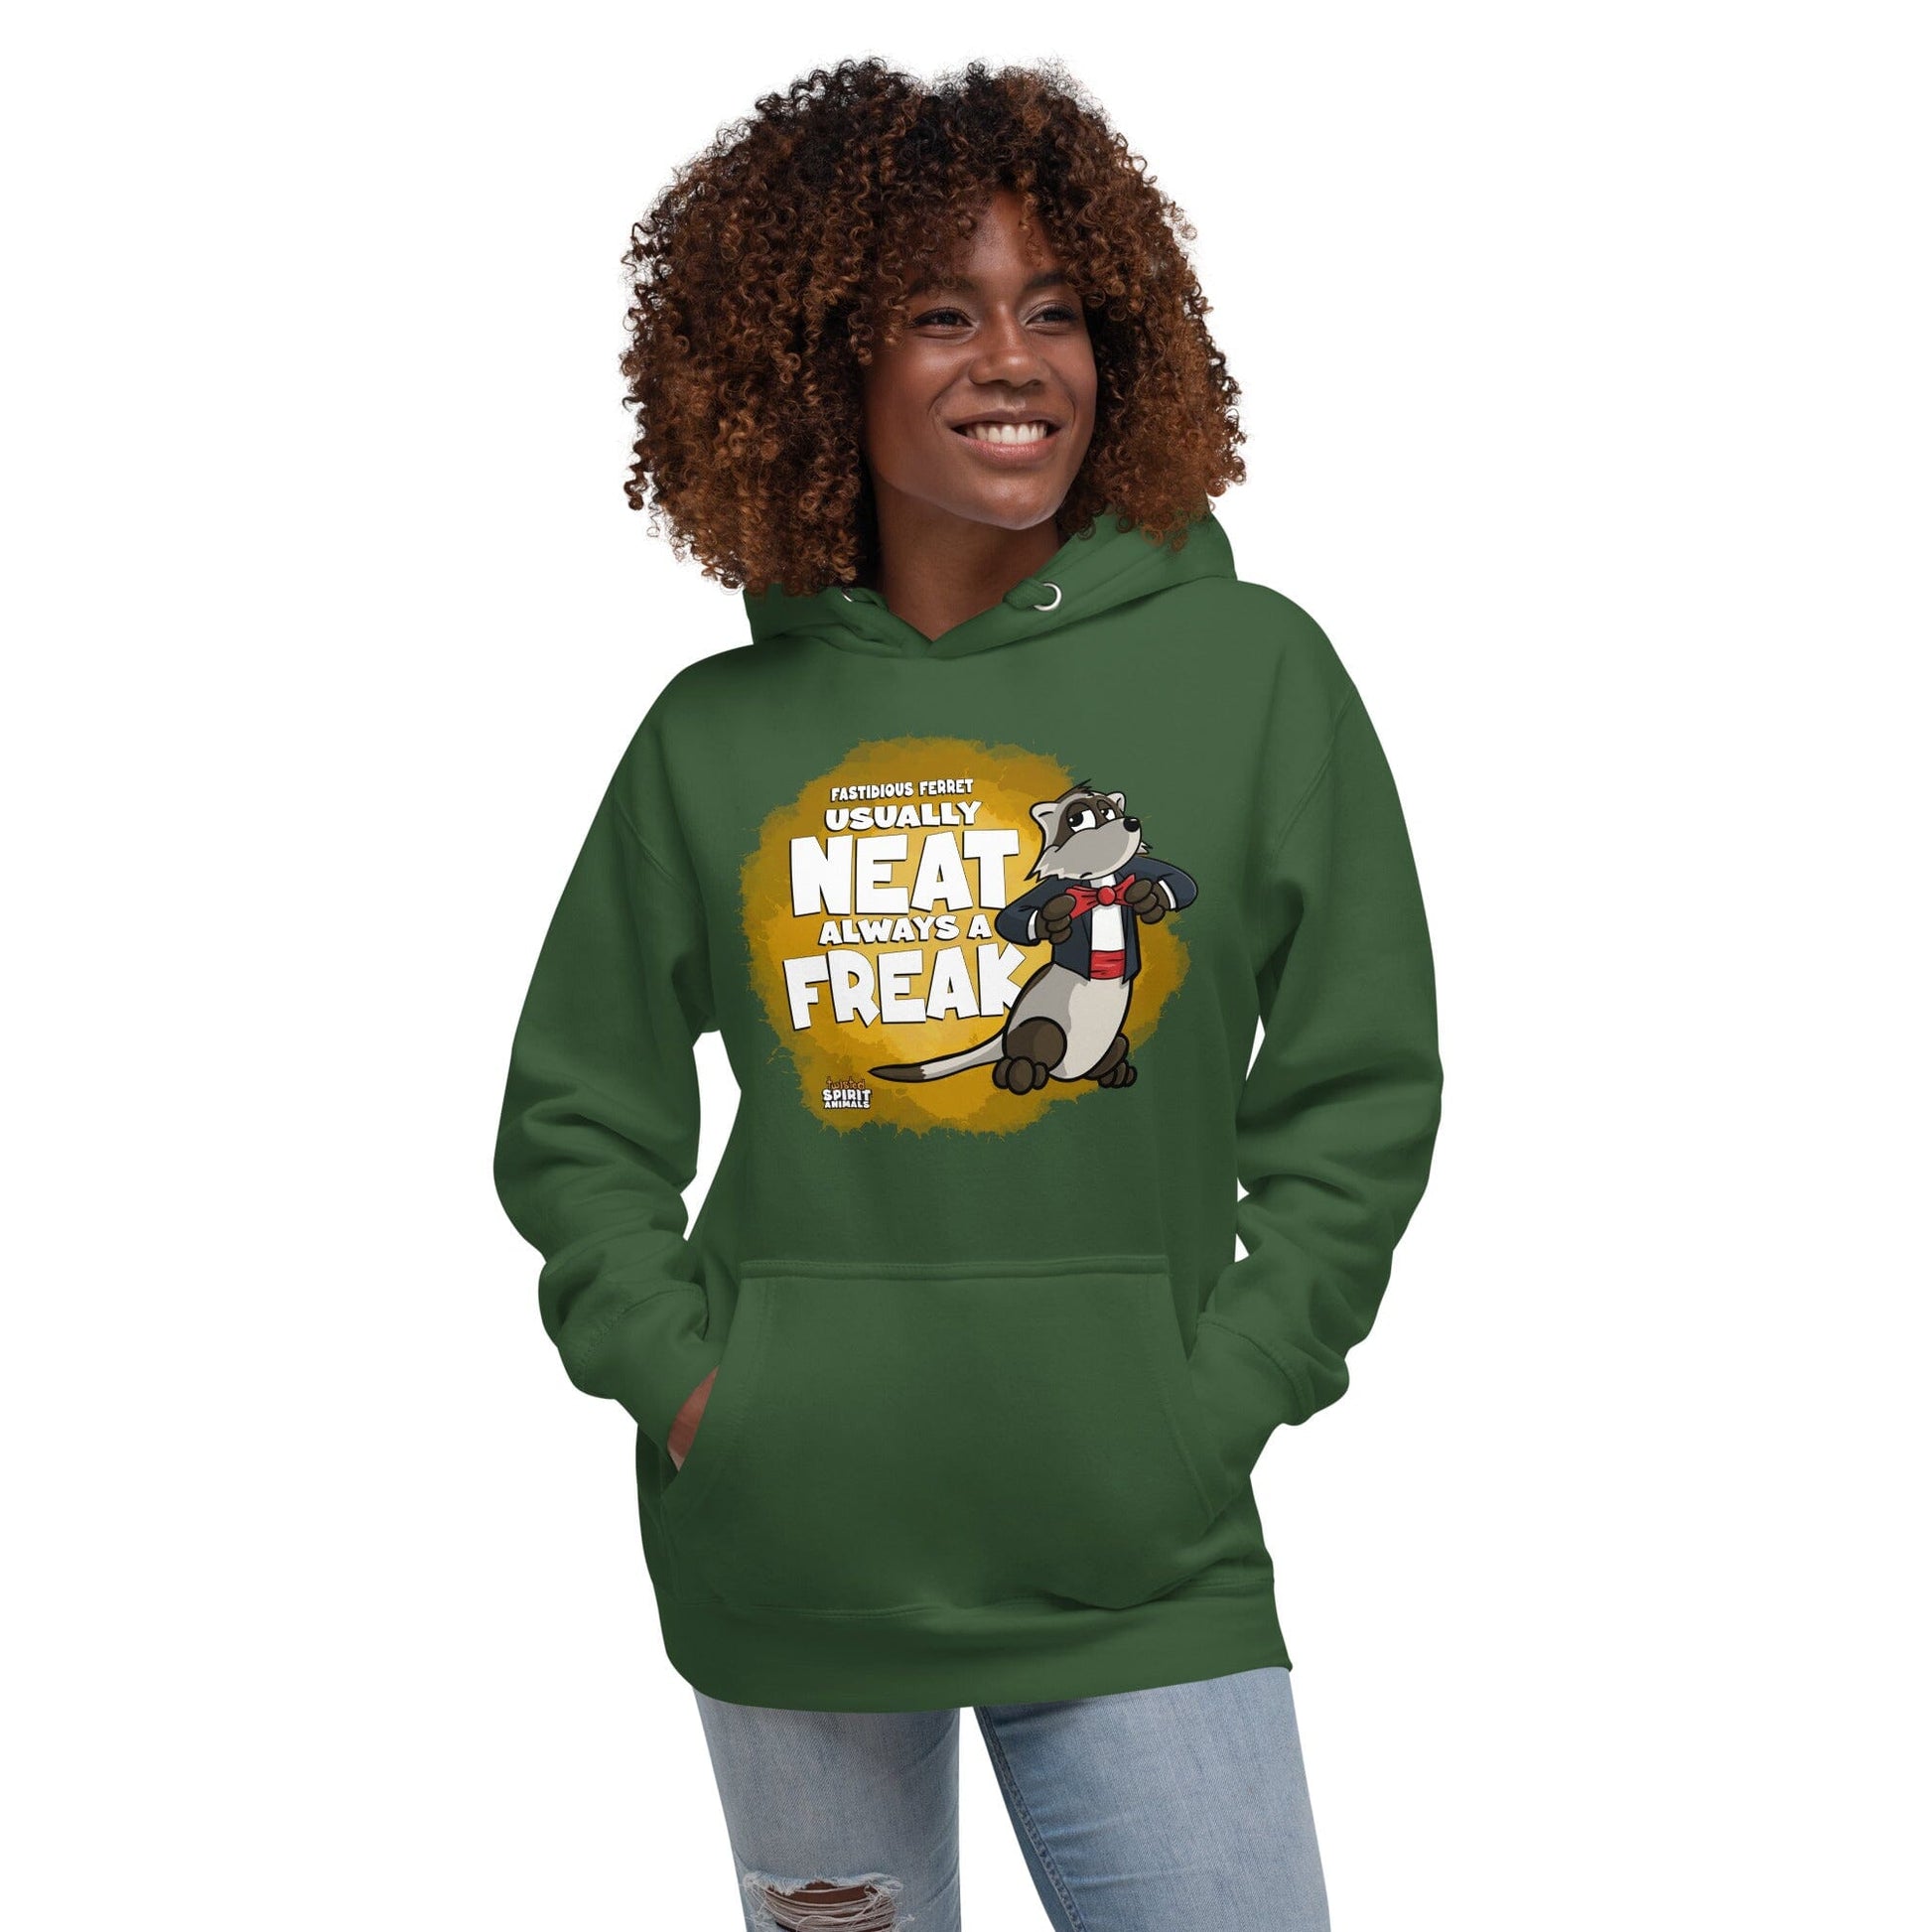 A Fastidious Ferret Unisex Hoodie hoodie Danger Bear Industries Forest Green S 